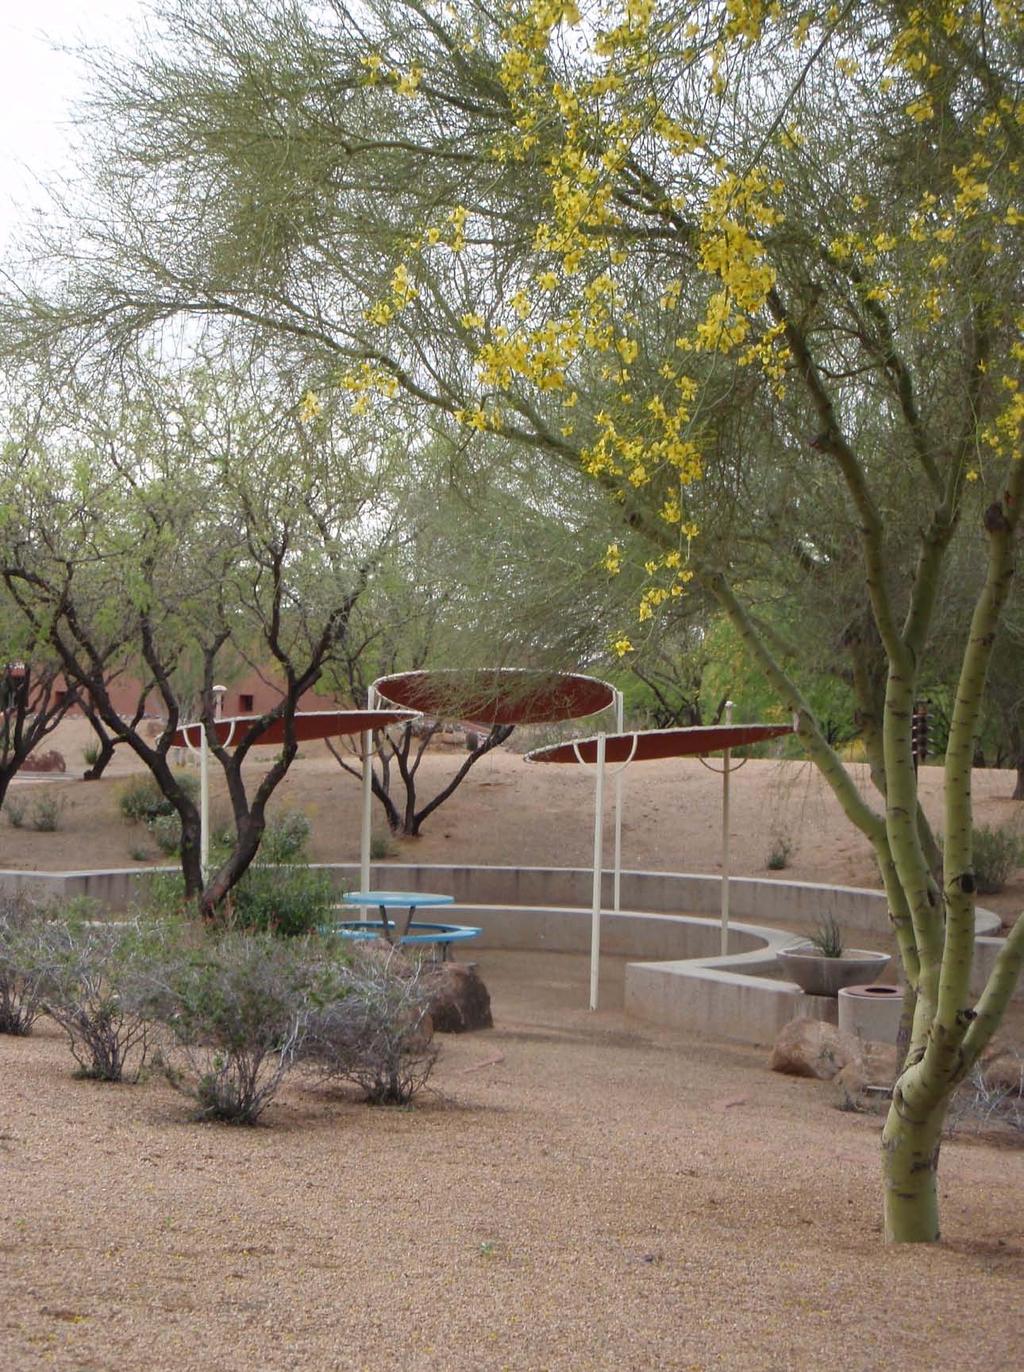 OPEN SPACE AND RECREATION The Town celebrates and maintains the spectacular visual character of our Sonoran Desert setting and we value our open space, mountain views, washes, vegetation, and